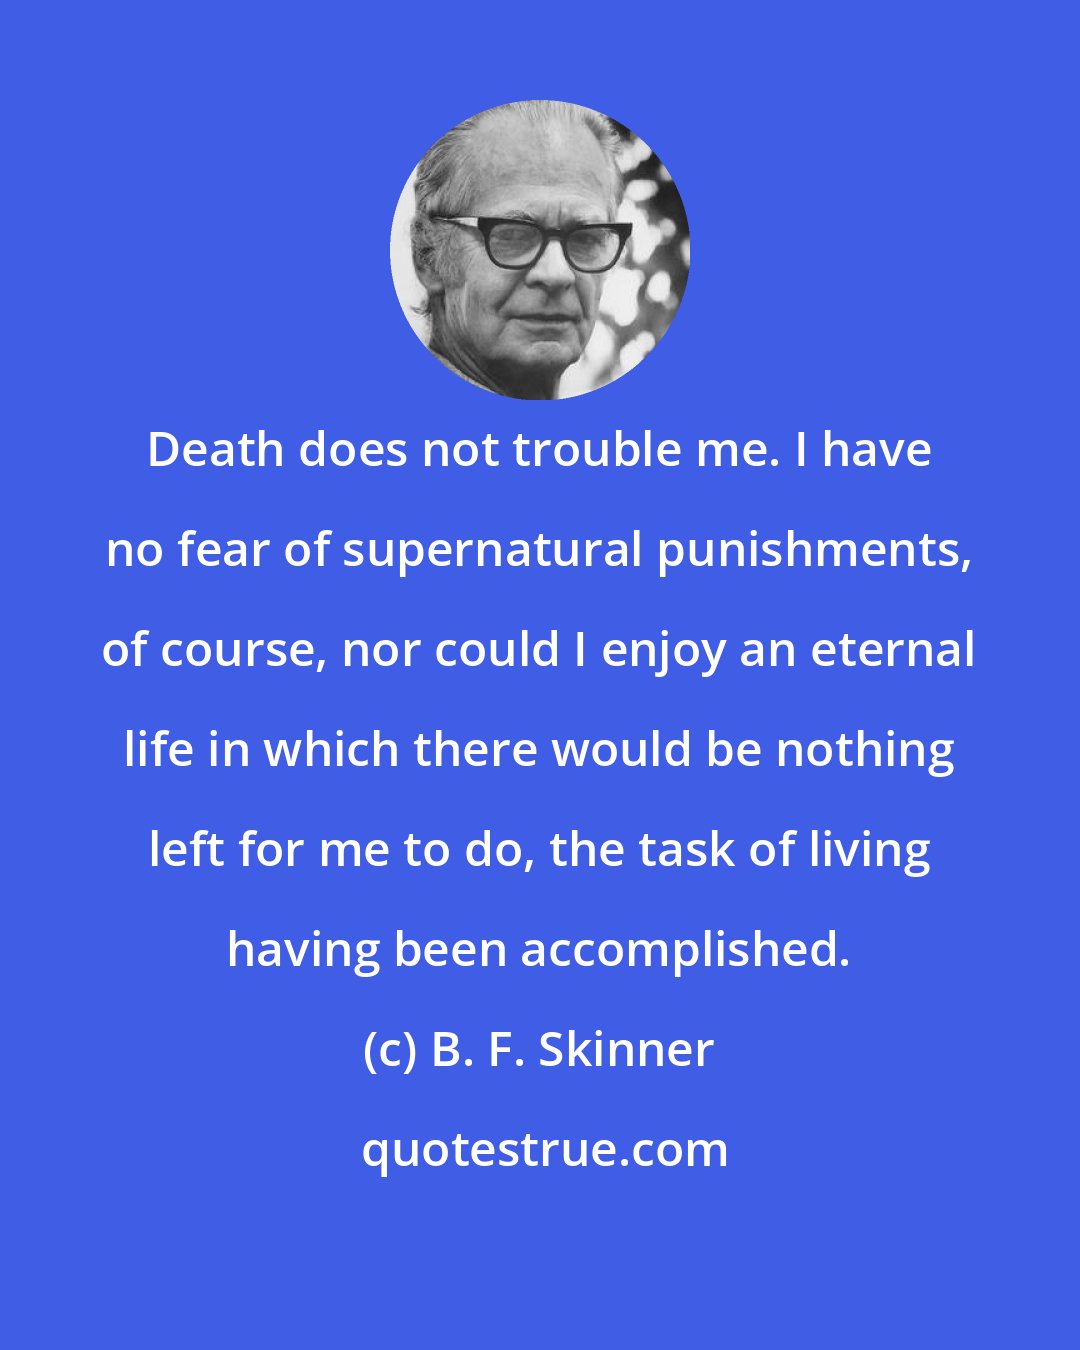 B. F. Skinner: Death does not trouble me. I have no fear of supernatural punishments, of course, nor could I enjoy an eternal life in which there would be nothing left for me to do, the task of living having been accomplished.